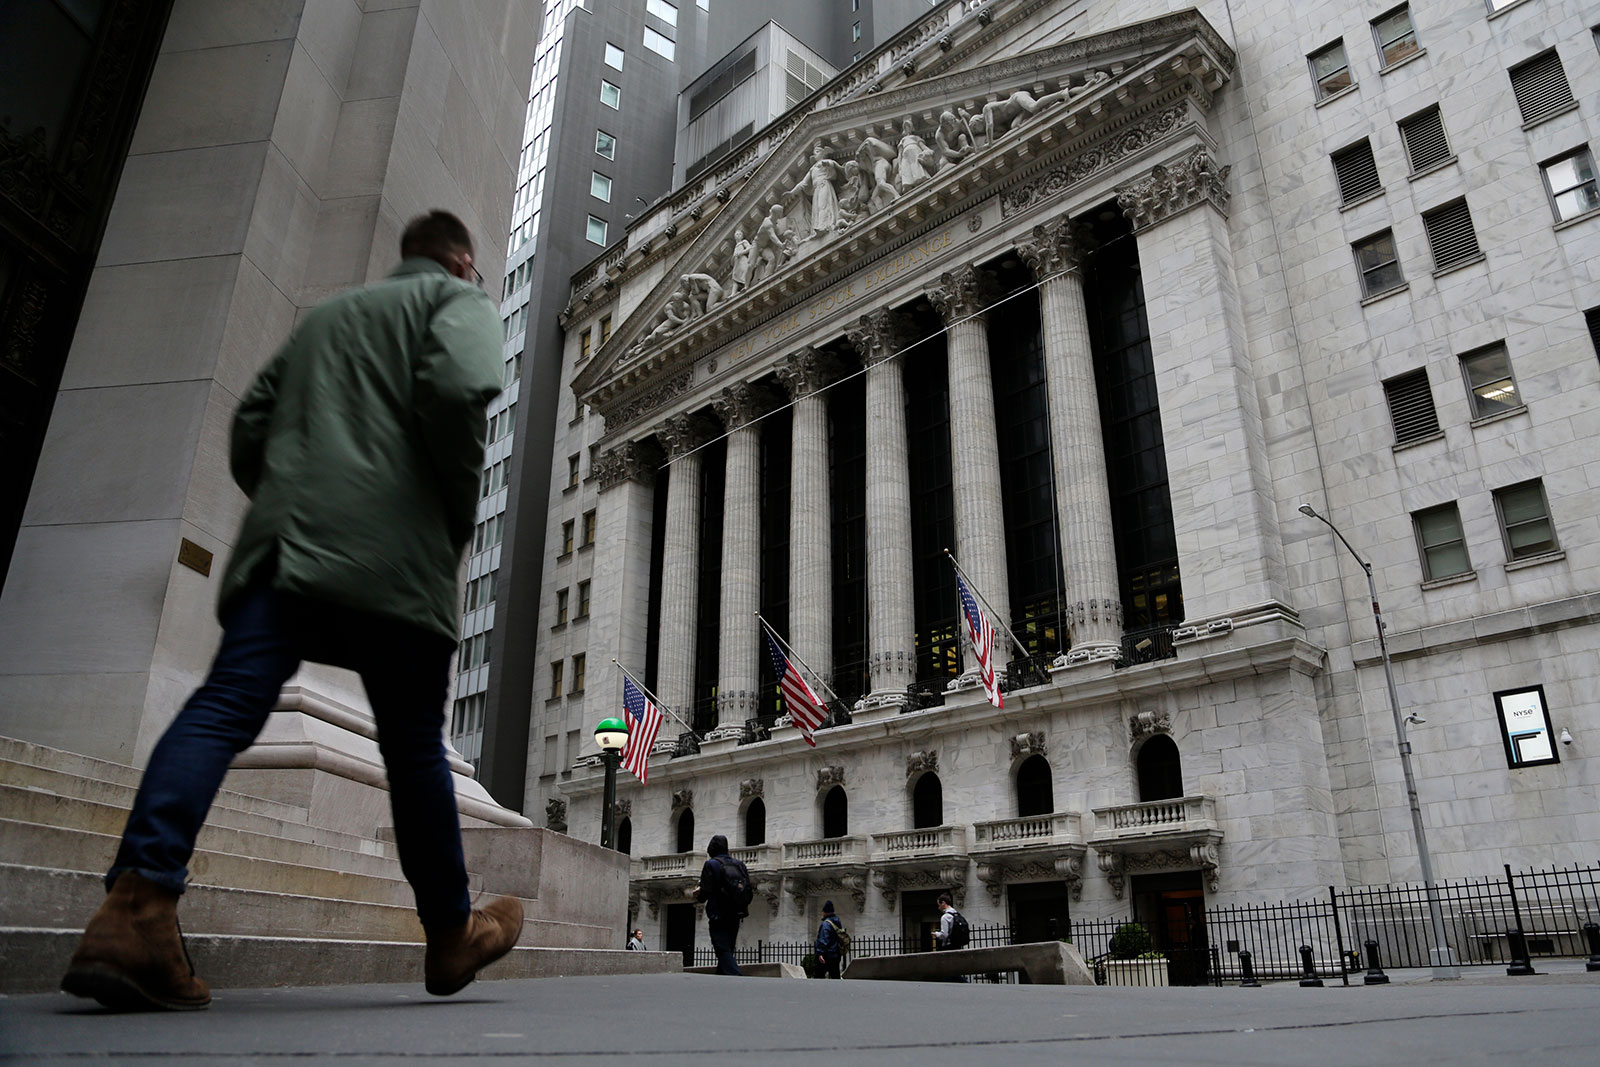 People pass the front of the New York Stock Exchange in New York on March 22.